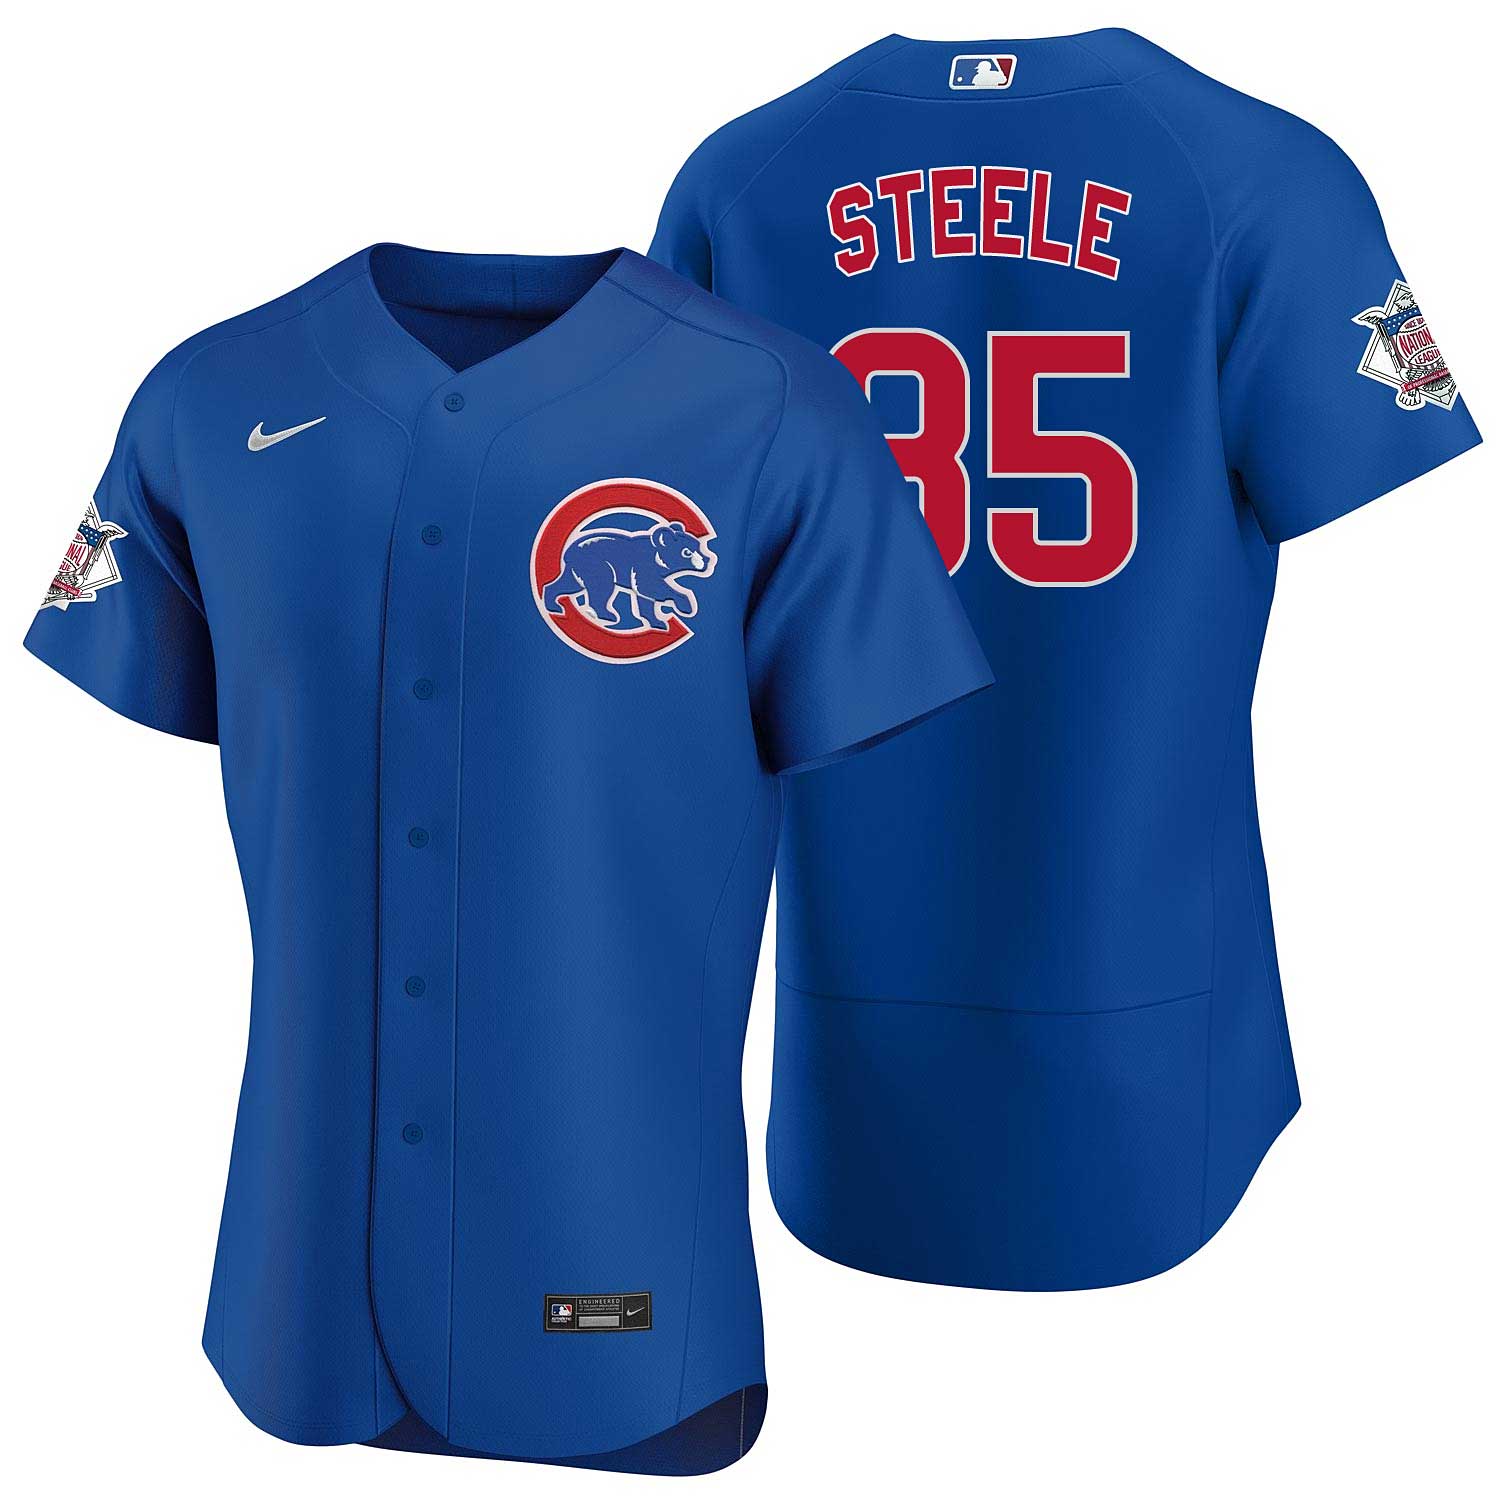 Chicago Cubs Justin Steele Nike Alternate Authentic Jersey 60 = 4X/5X-Large